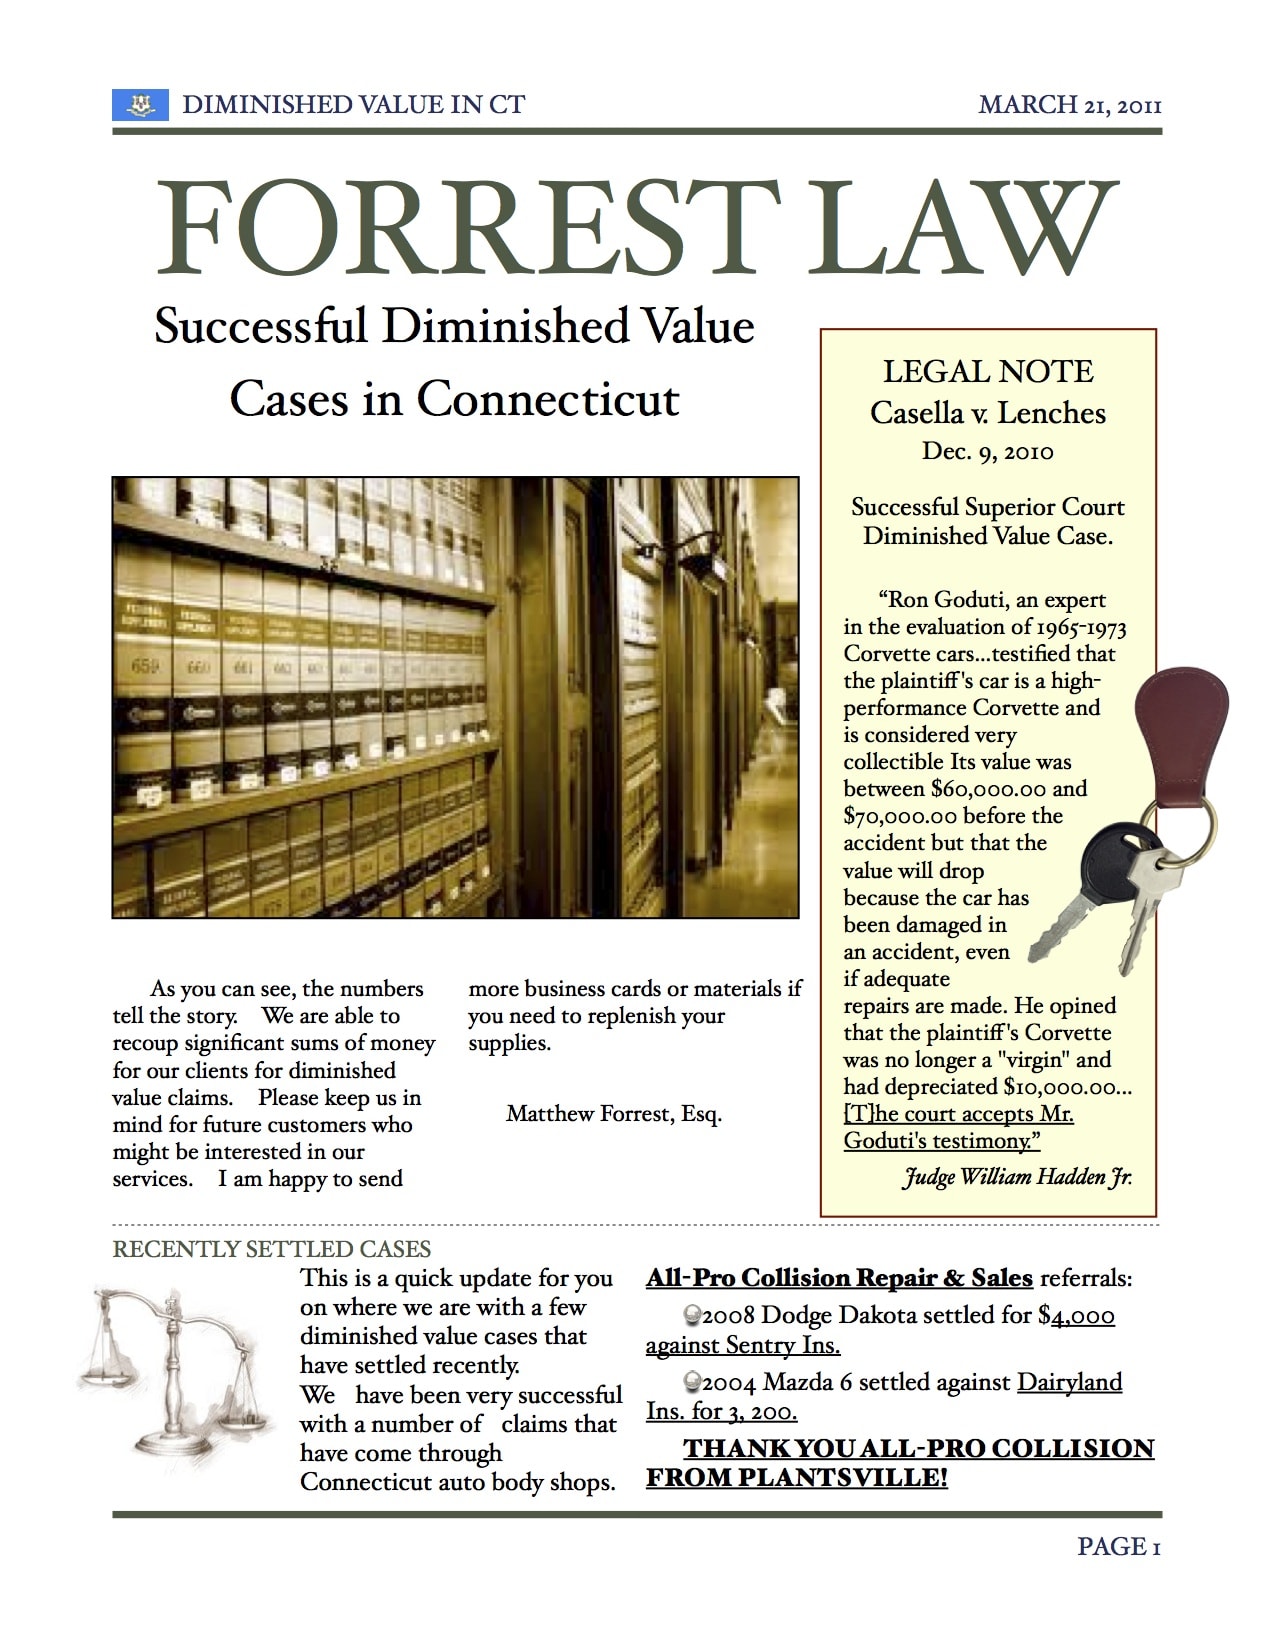 Forrest Law Newsletter Updates About Successful Diminished Value Claims in Connecticut